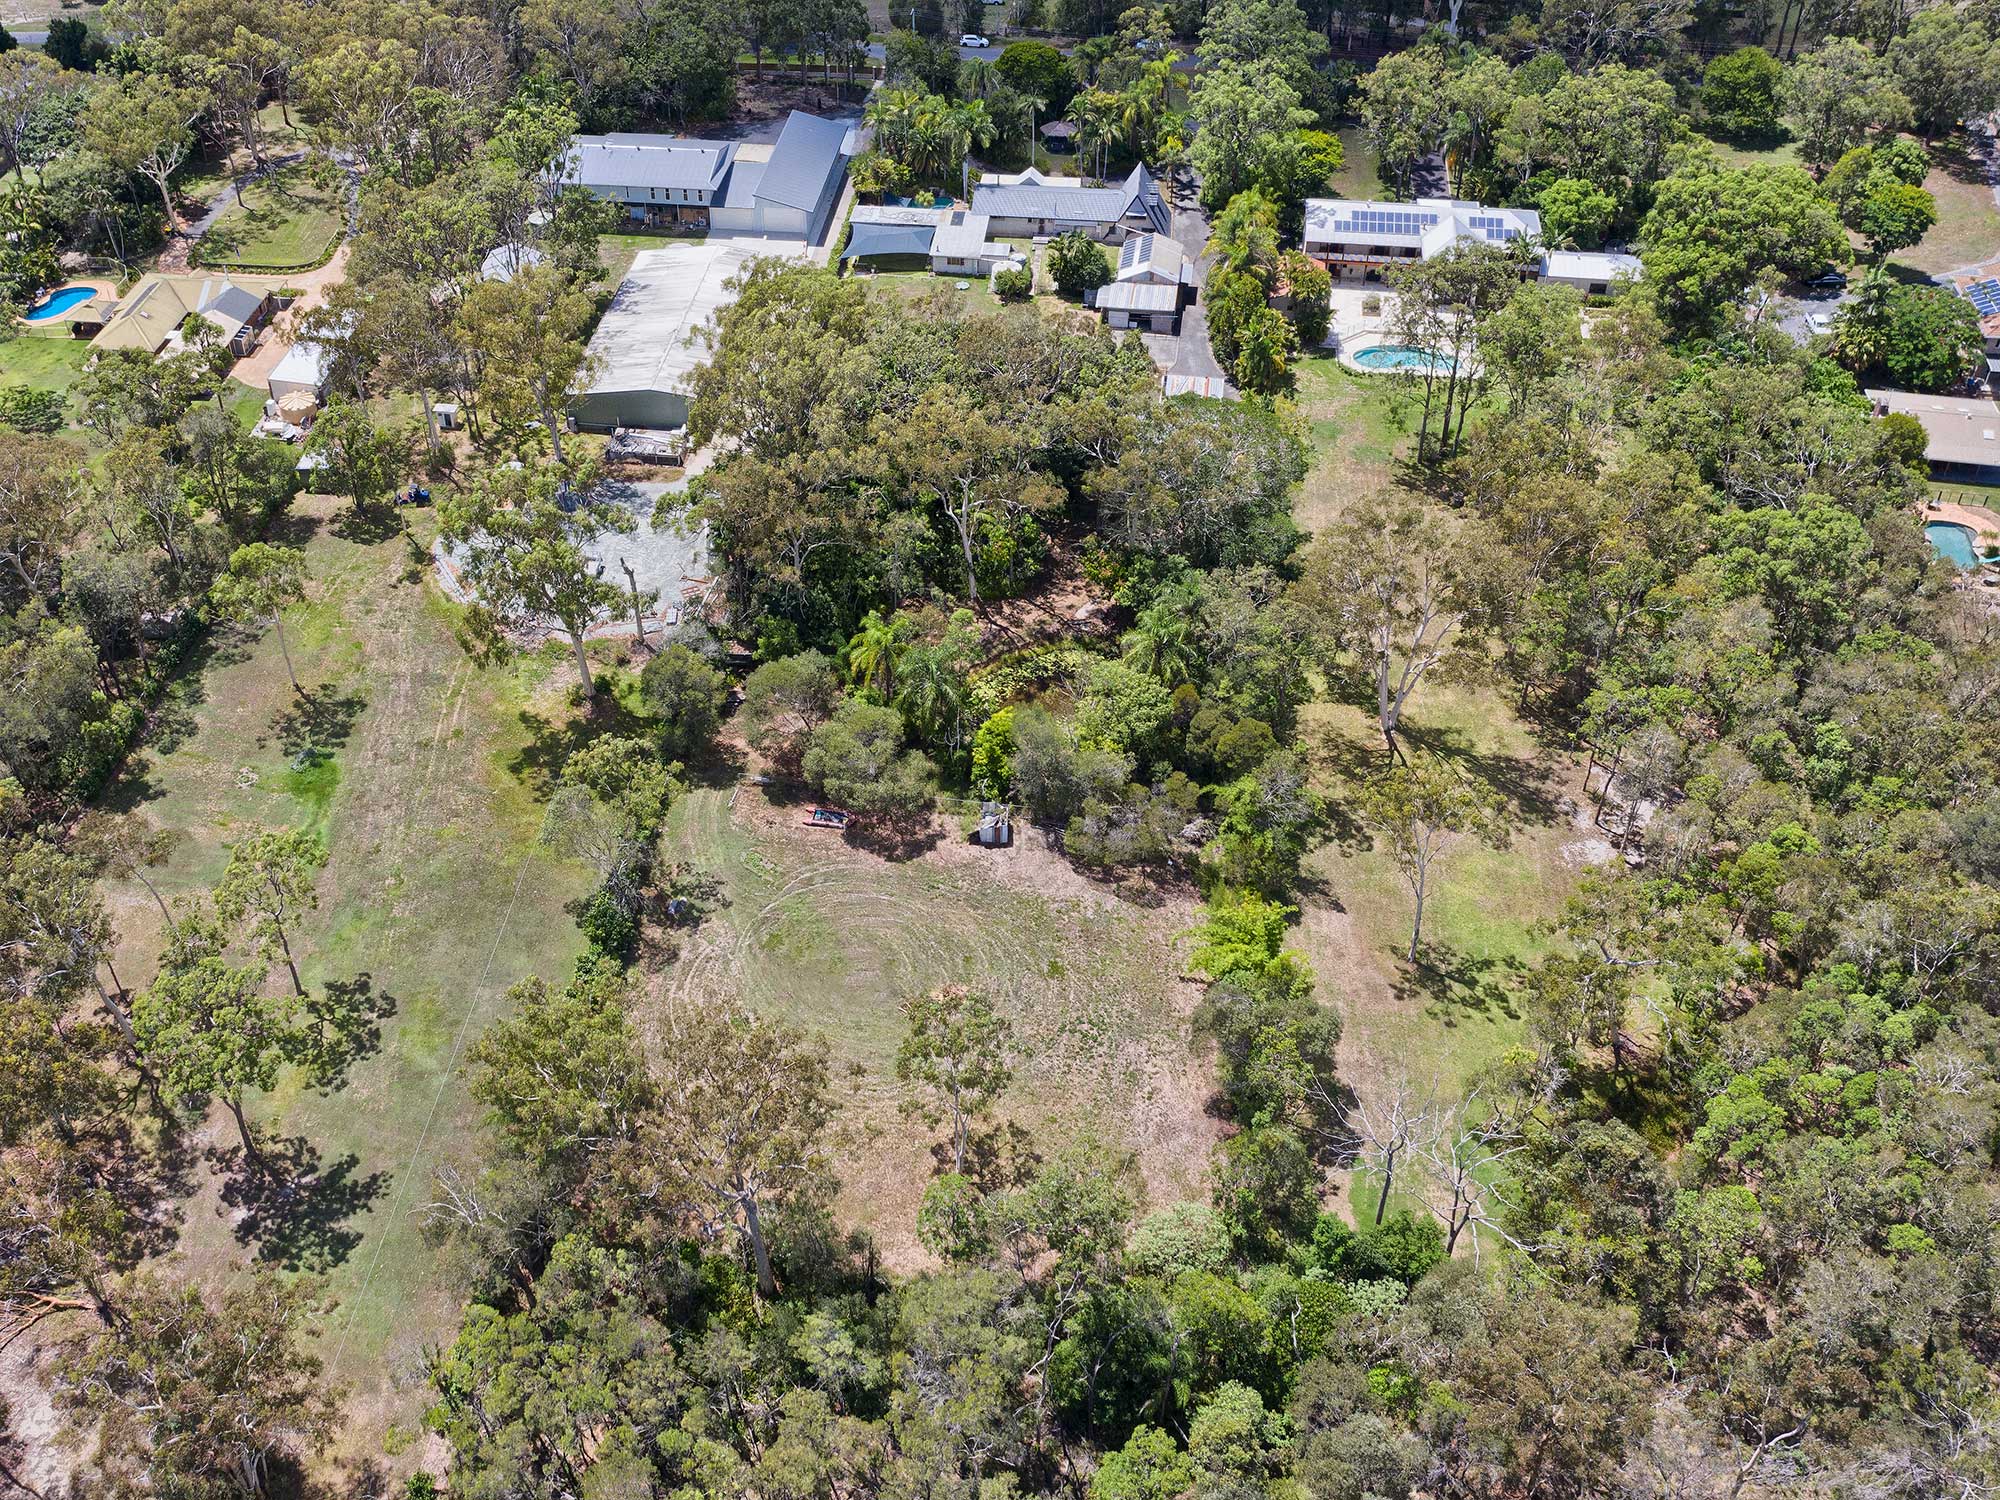 Aerial Drone Acreage Photography at Wildsoet St, Burbank - DroneAce Brisbane